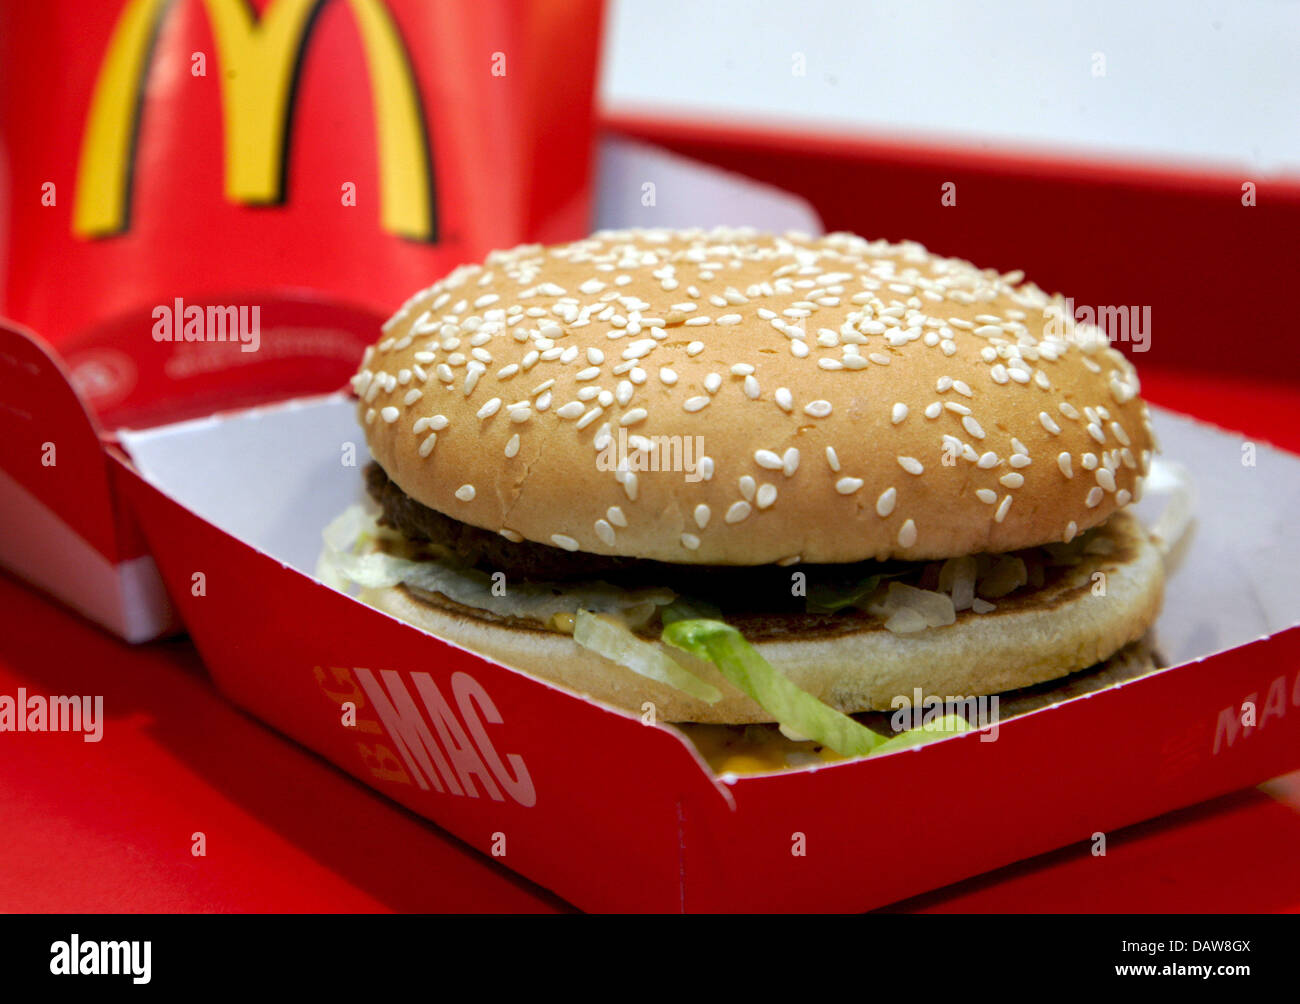 what is the cost of a big mac in germany